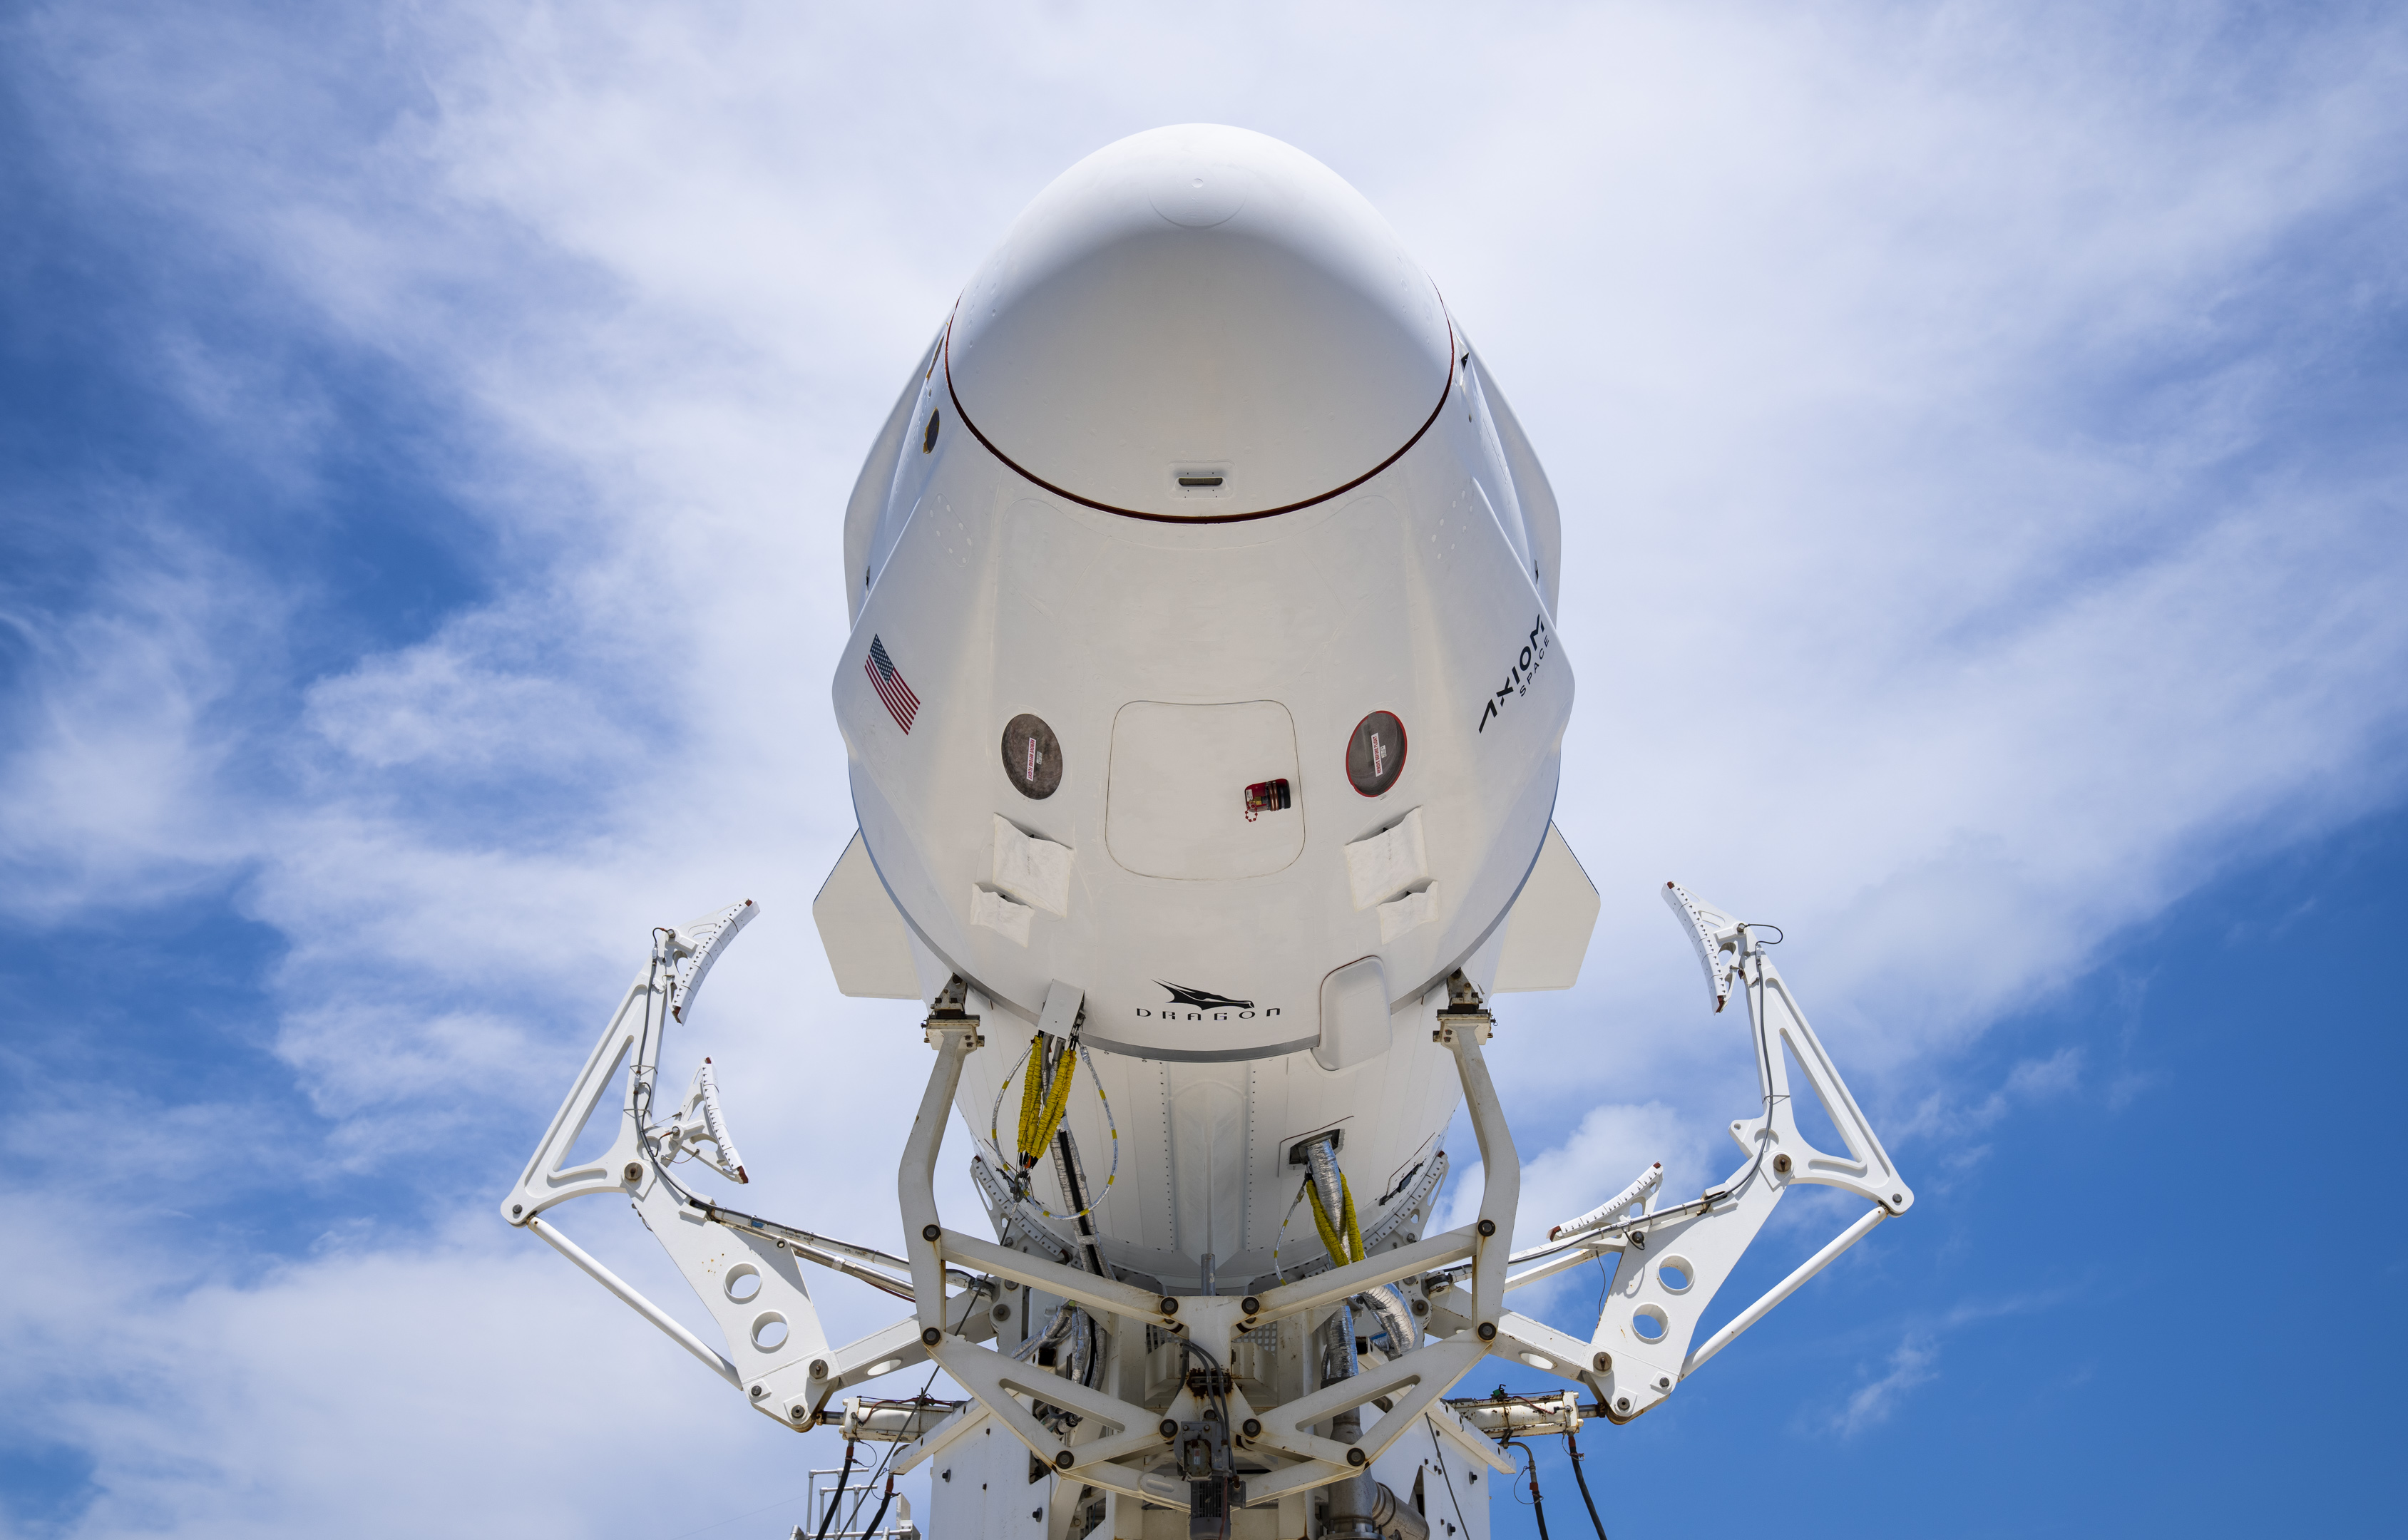 A look back at the Ax-1 Dragon and Falcon 9 during their announcement on April 5, 2022.